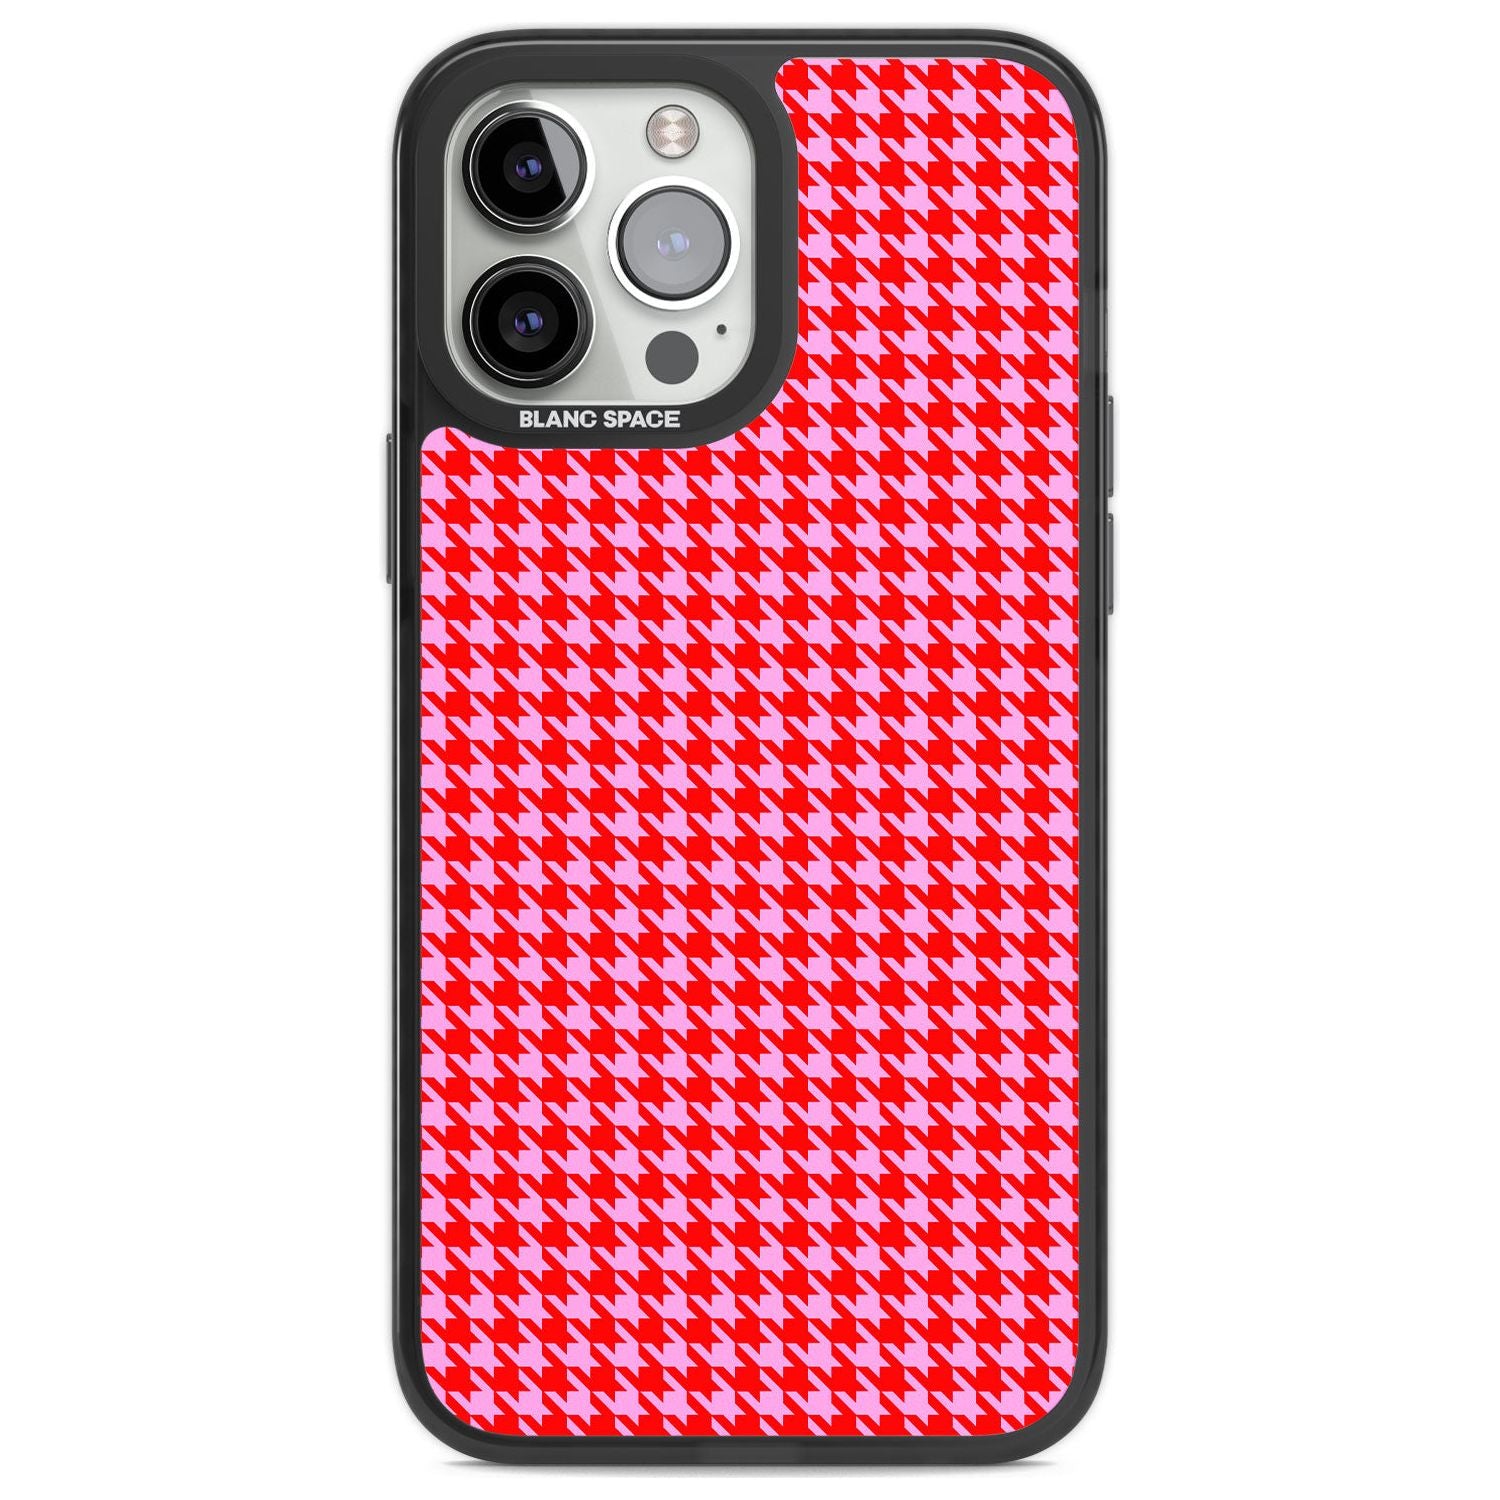 Neon Pink & Red Houndstooth Pattern Phone Case iPhone 13 Pro Max / Black Impact Case,iPhone 14 Pro Max / Black Impact Case Blanc Space